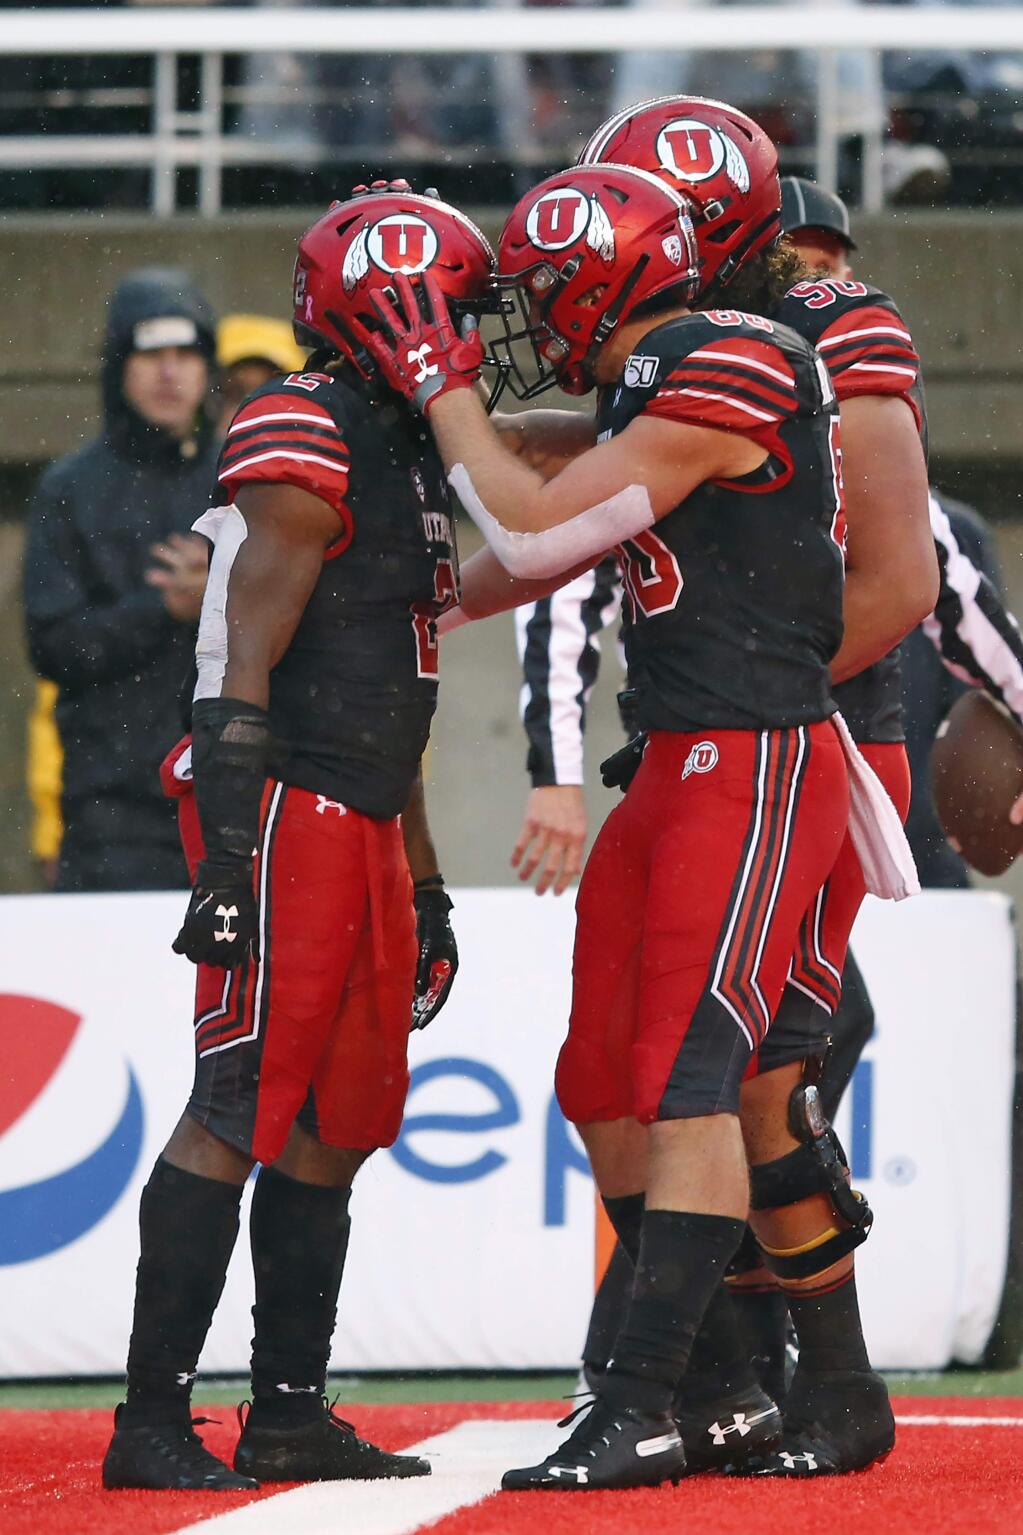 Utah running back Zack Moss, left, celebrates with teammates after his 1-yard touchdown run during the first half against Arizona State on Saturday, Oct. 19, 2019, in Salt Lake City. (AP Photo/Rick Bowmer)